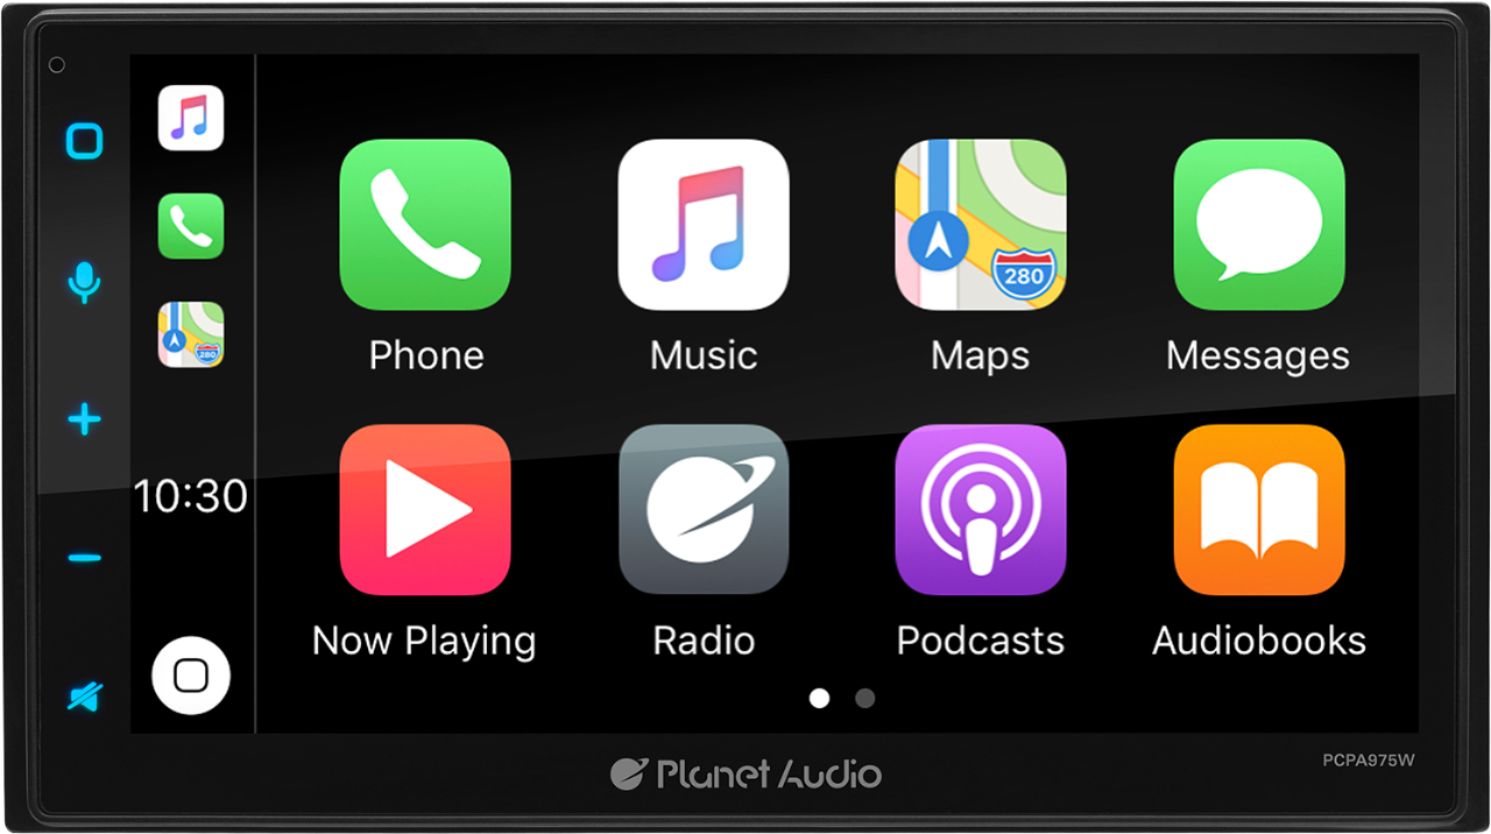 WGN Radio is now available on Apple CarPlay and Android Auto